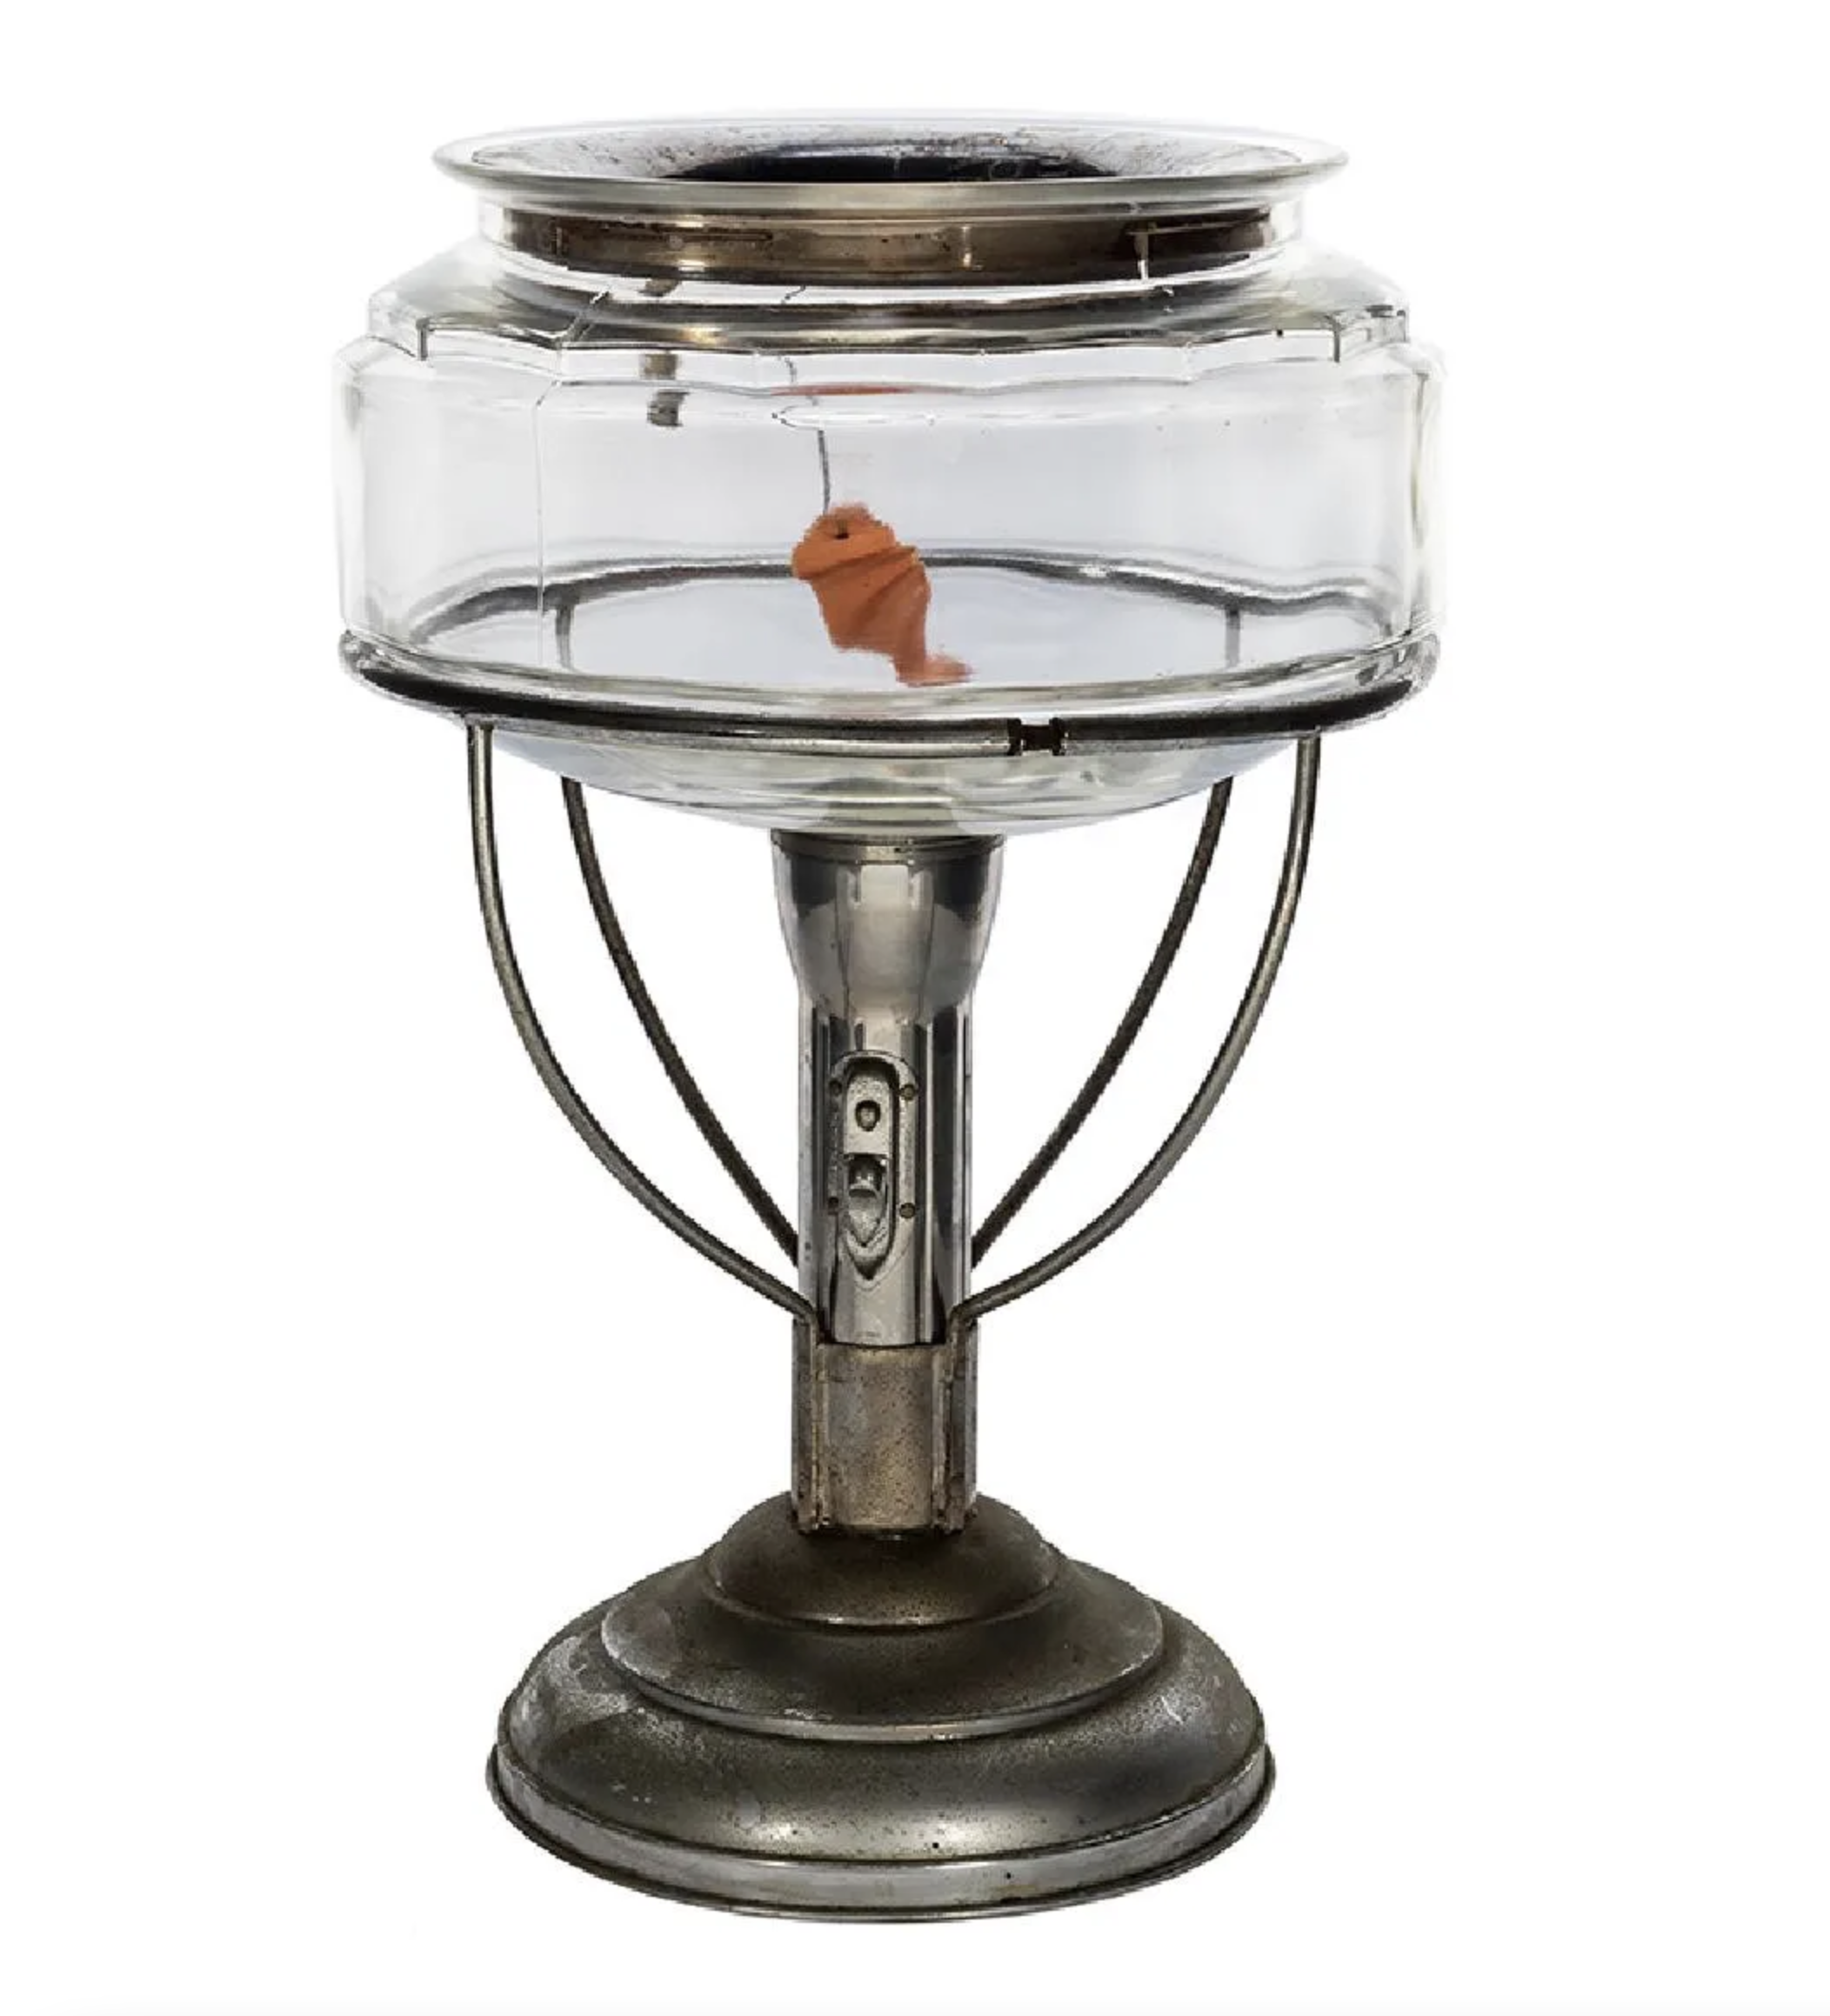 Dante’s Aerial Fishing Bowl and Stand